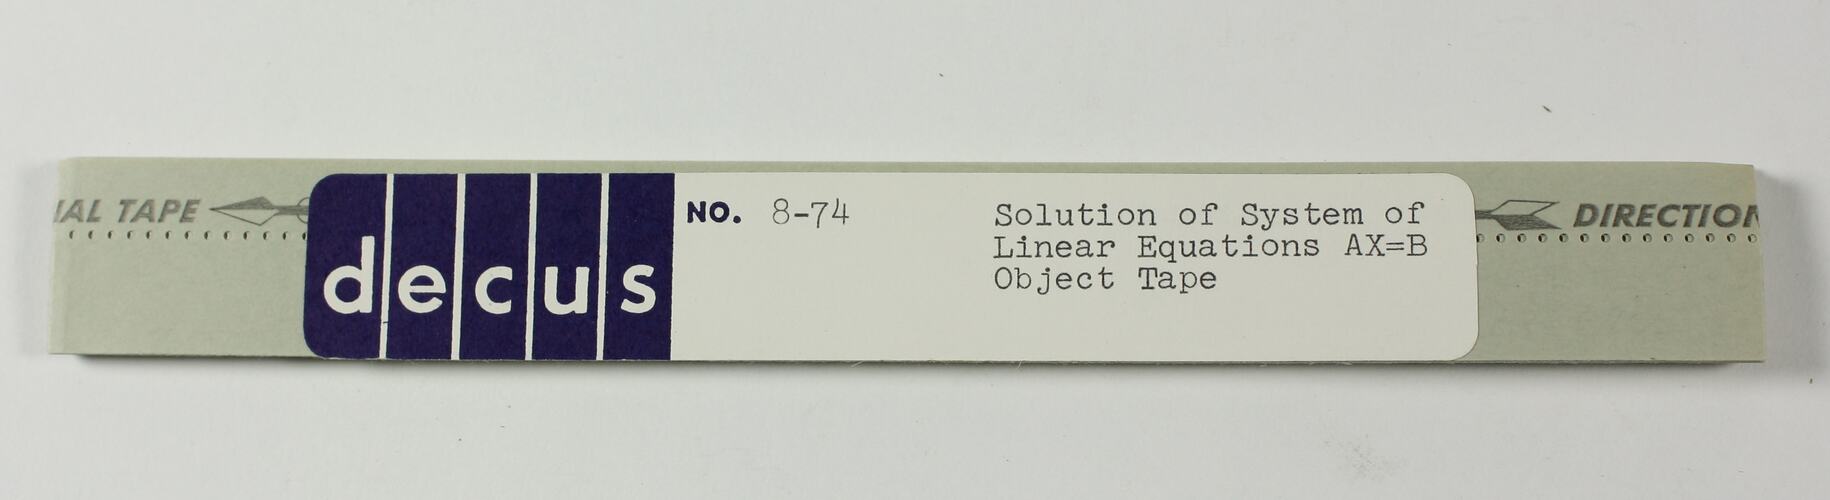 Folded paper tape marked '8-74 Solution of System of Linear Equations AX=B, Object Tape.